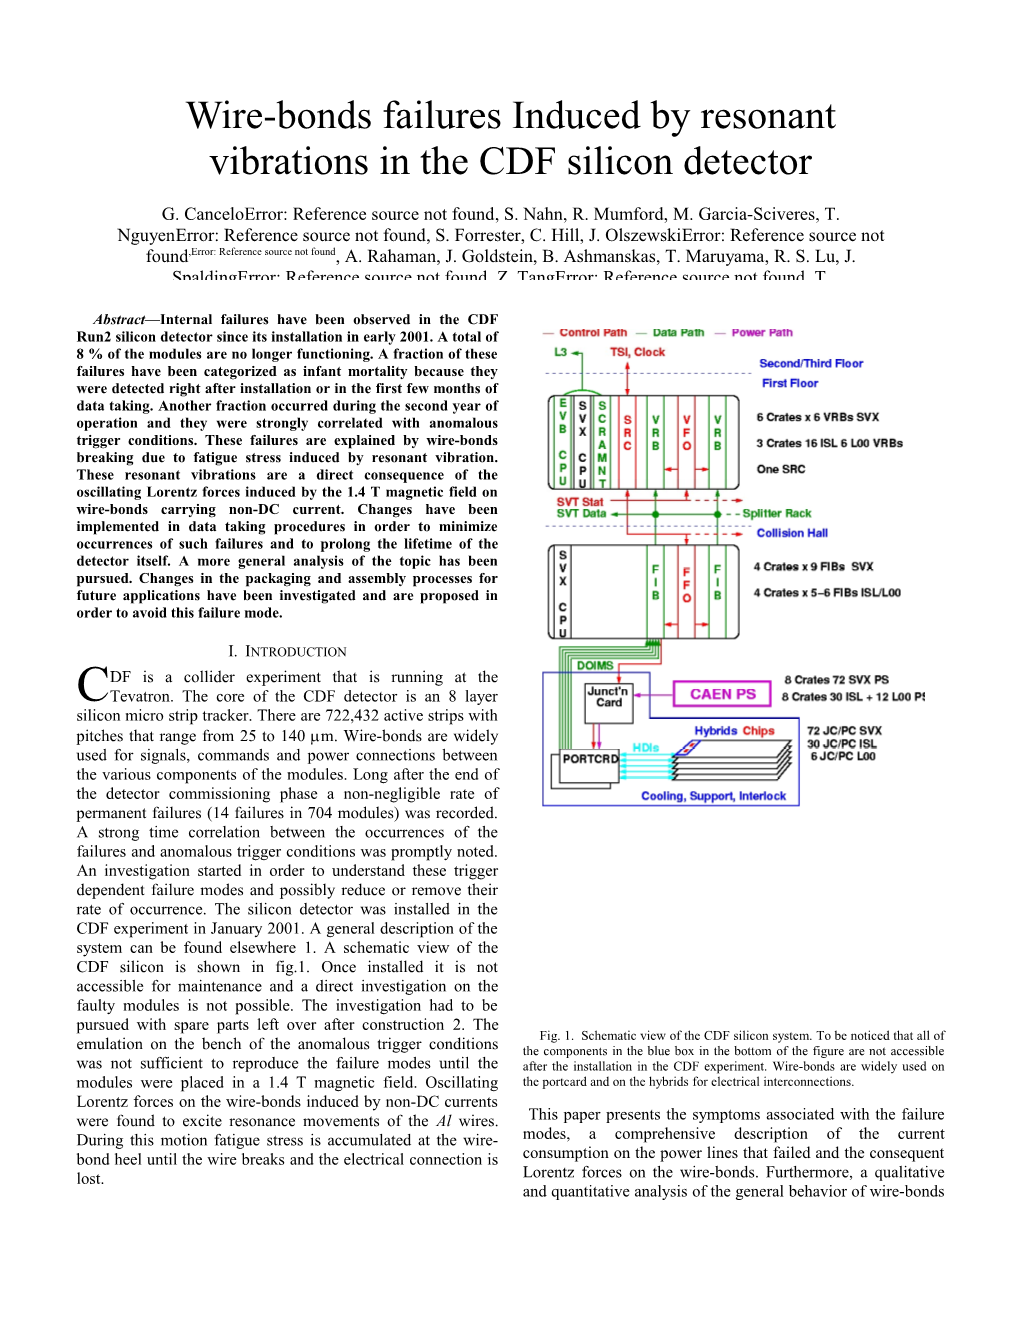 Wire-Bonds Failures Induced by Resonant Vibrations in the CDF Silicon Detector